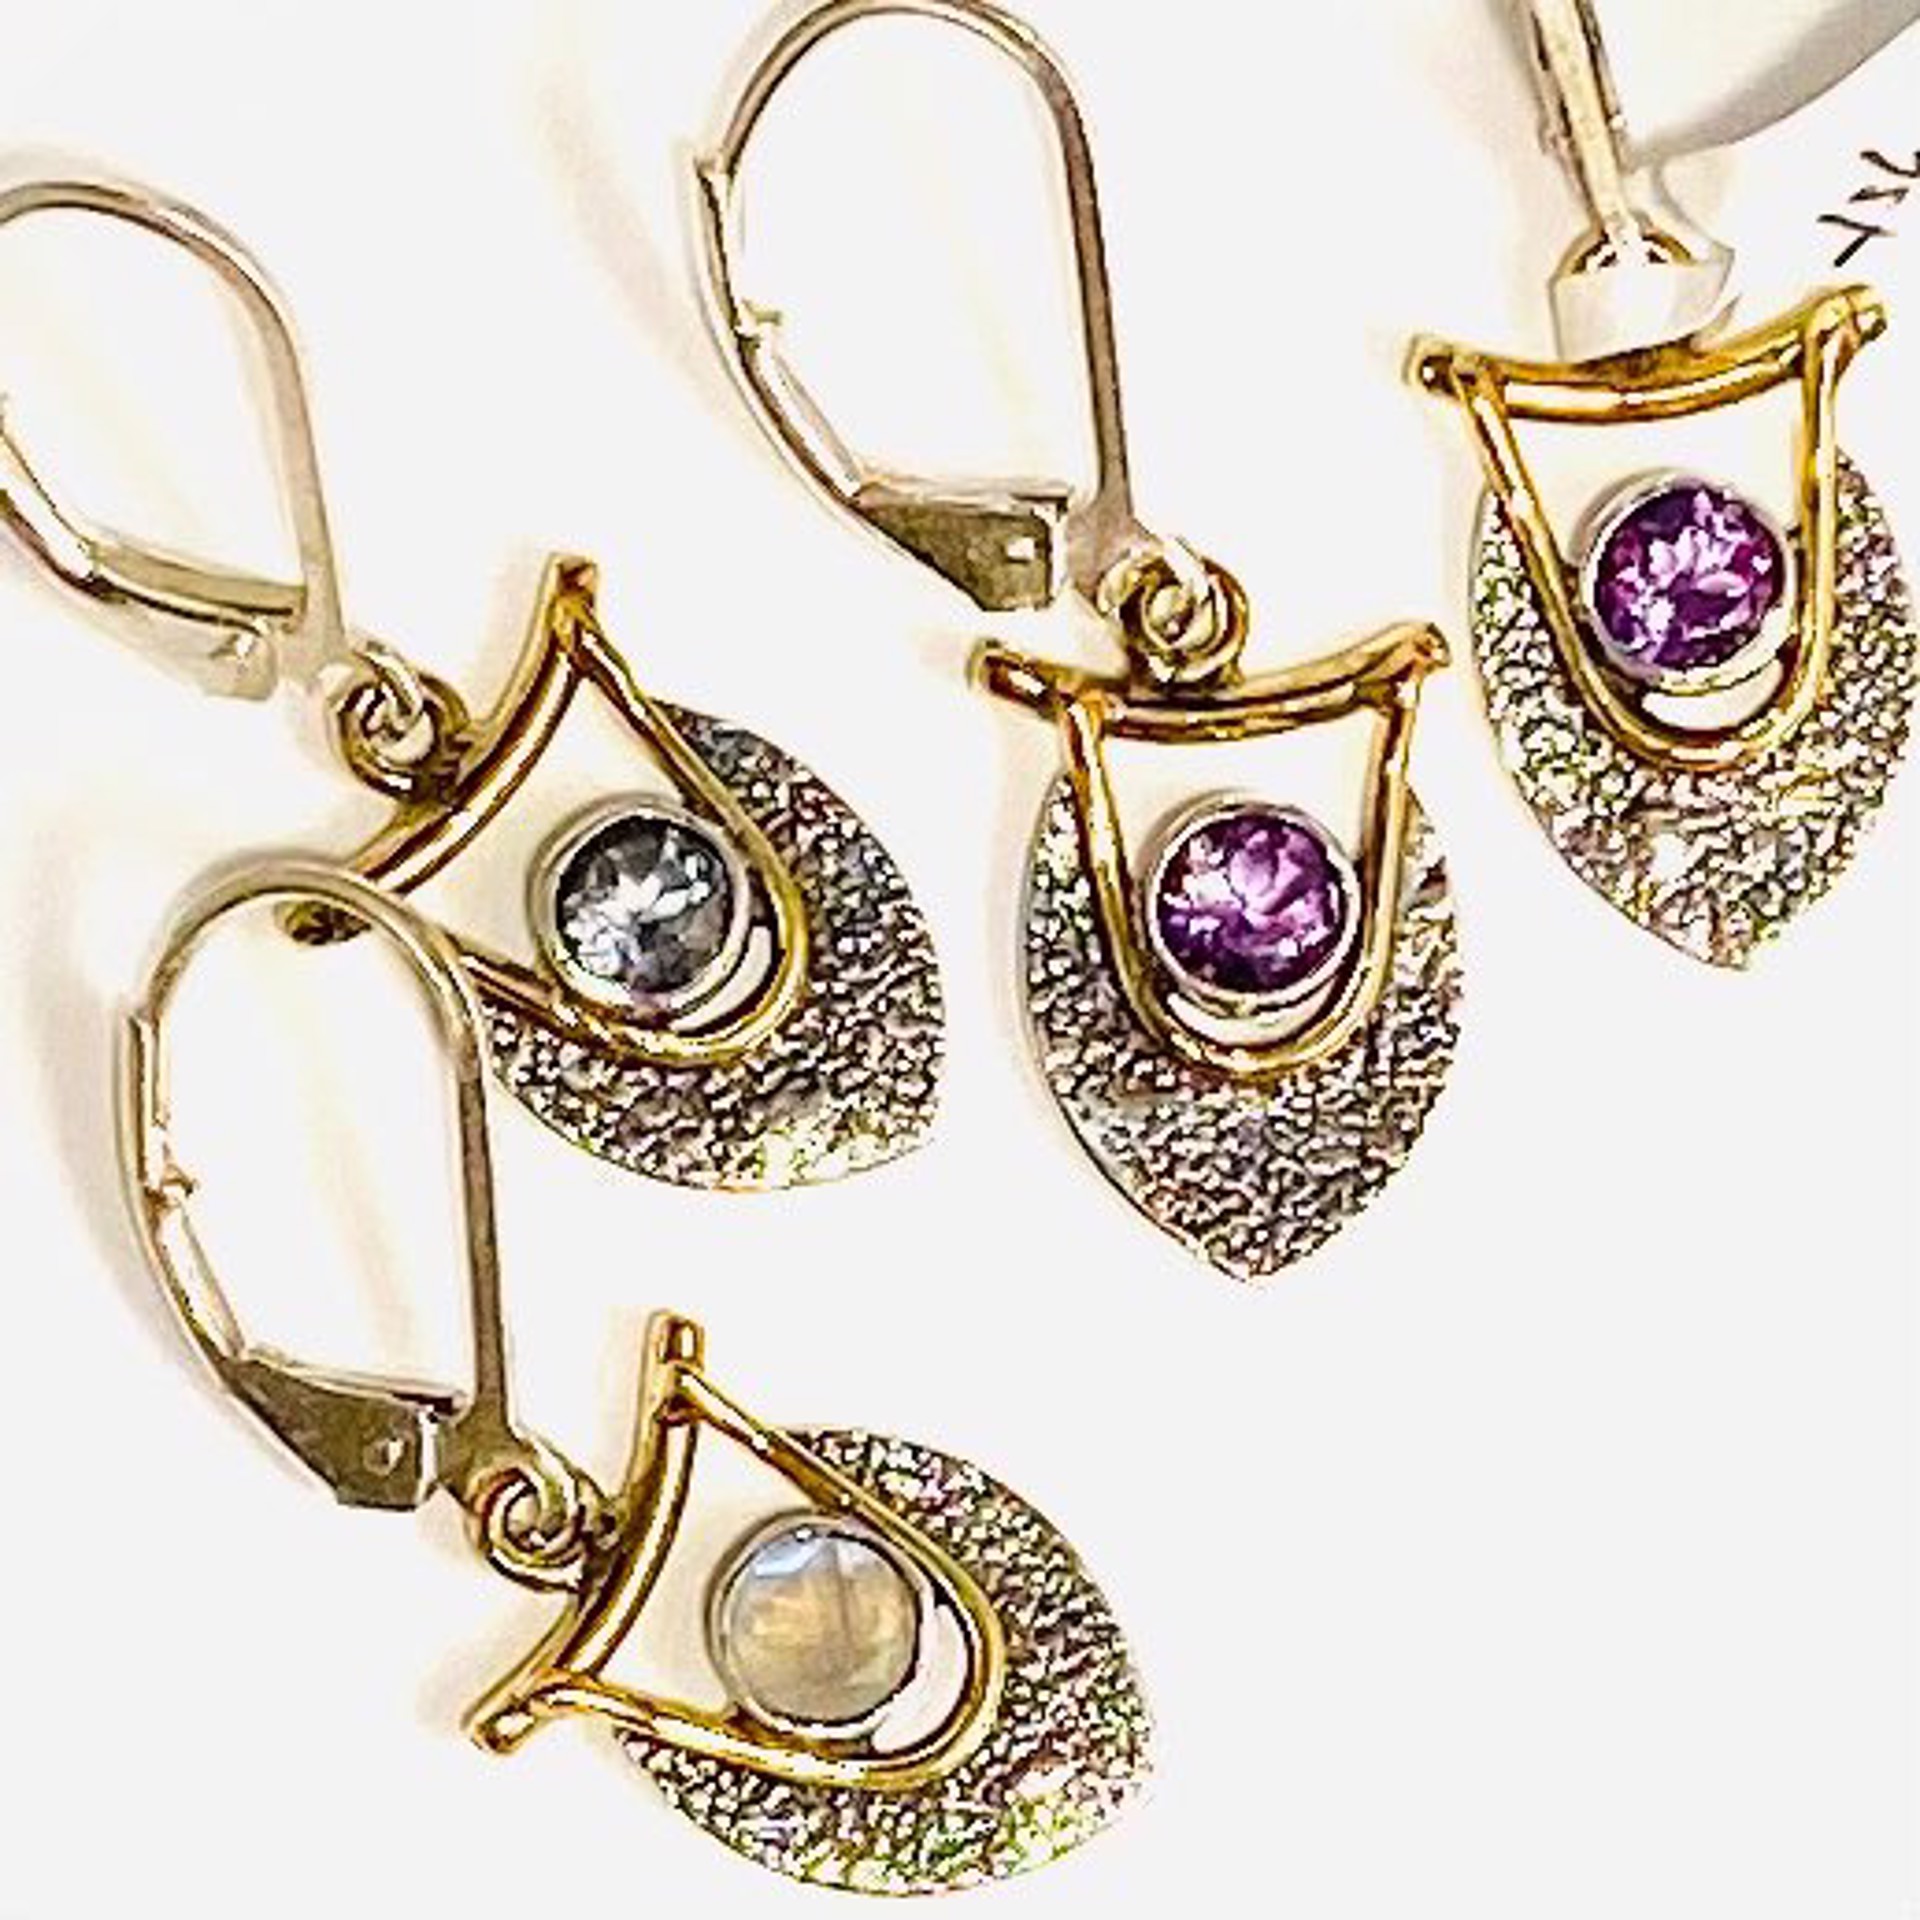 MON SE 2016 Moonstone, Blue Topaz, or Amethyst Earrings, french wire clasp by Monica Mehta